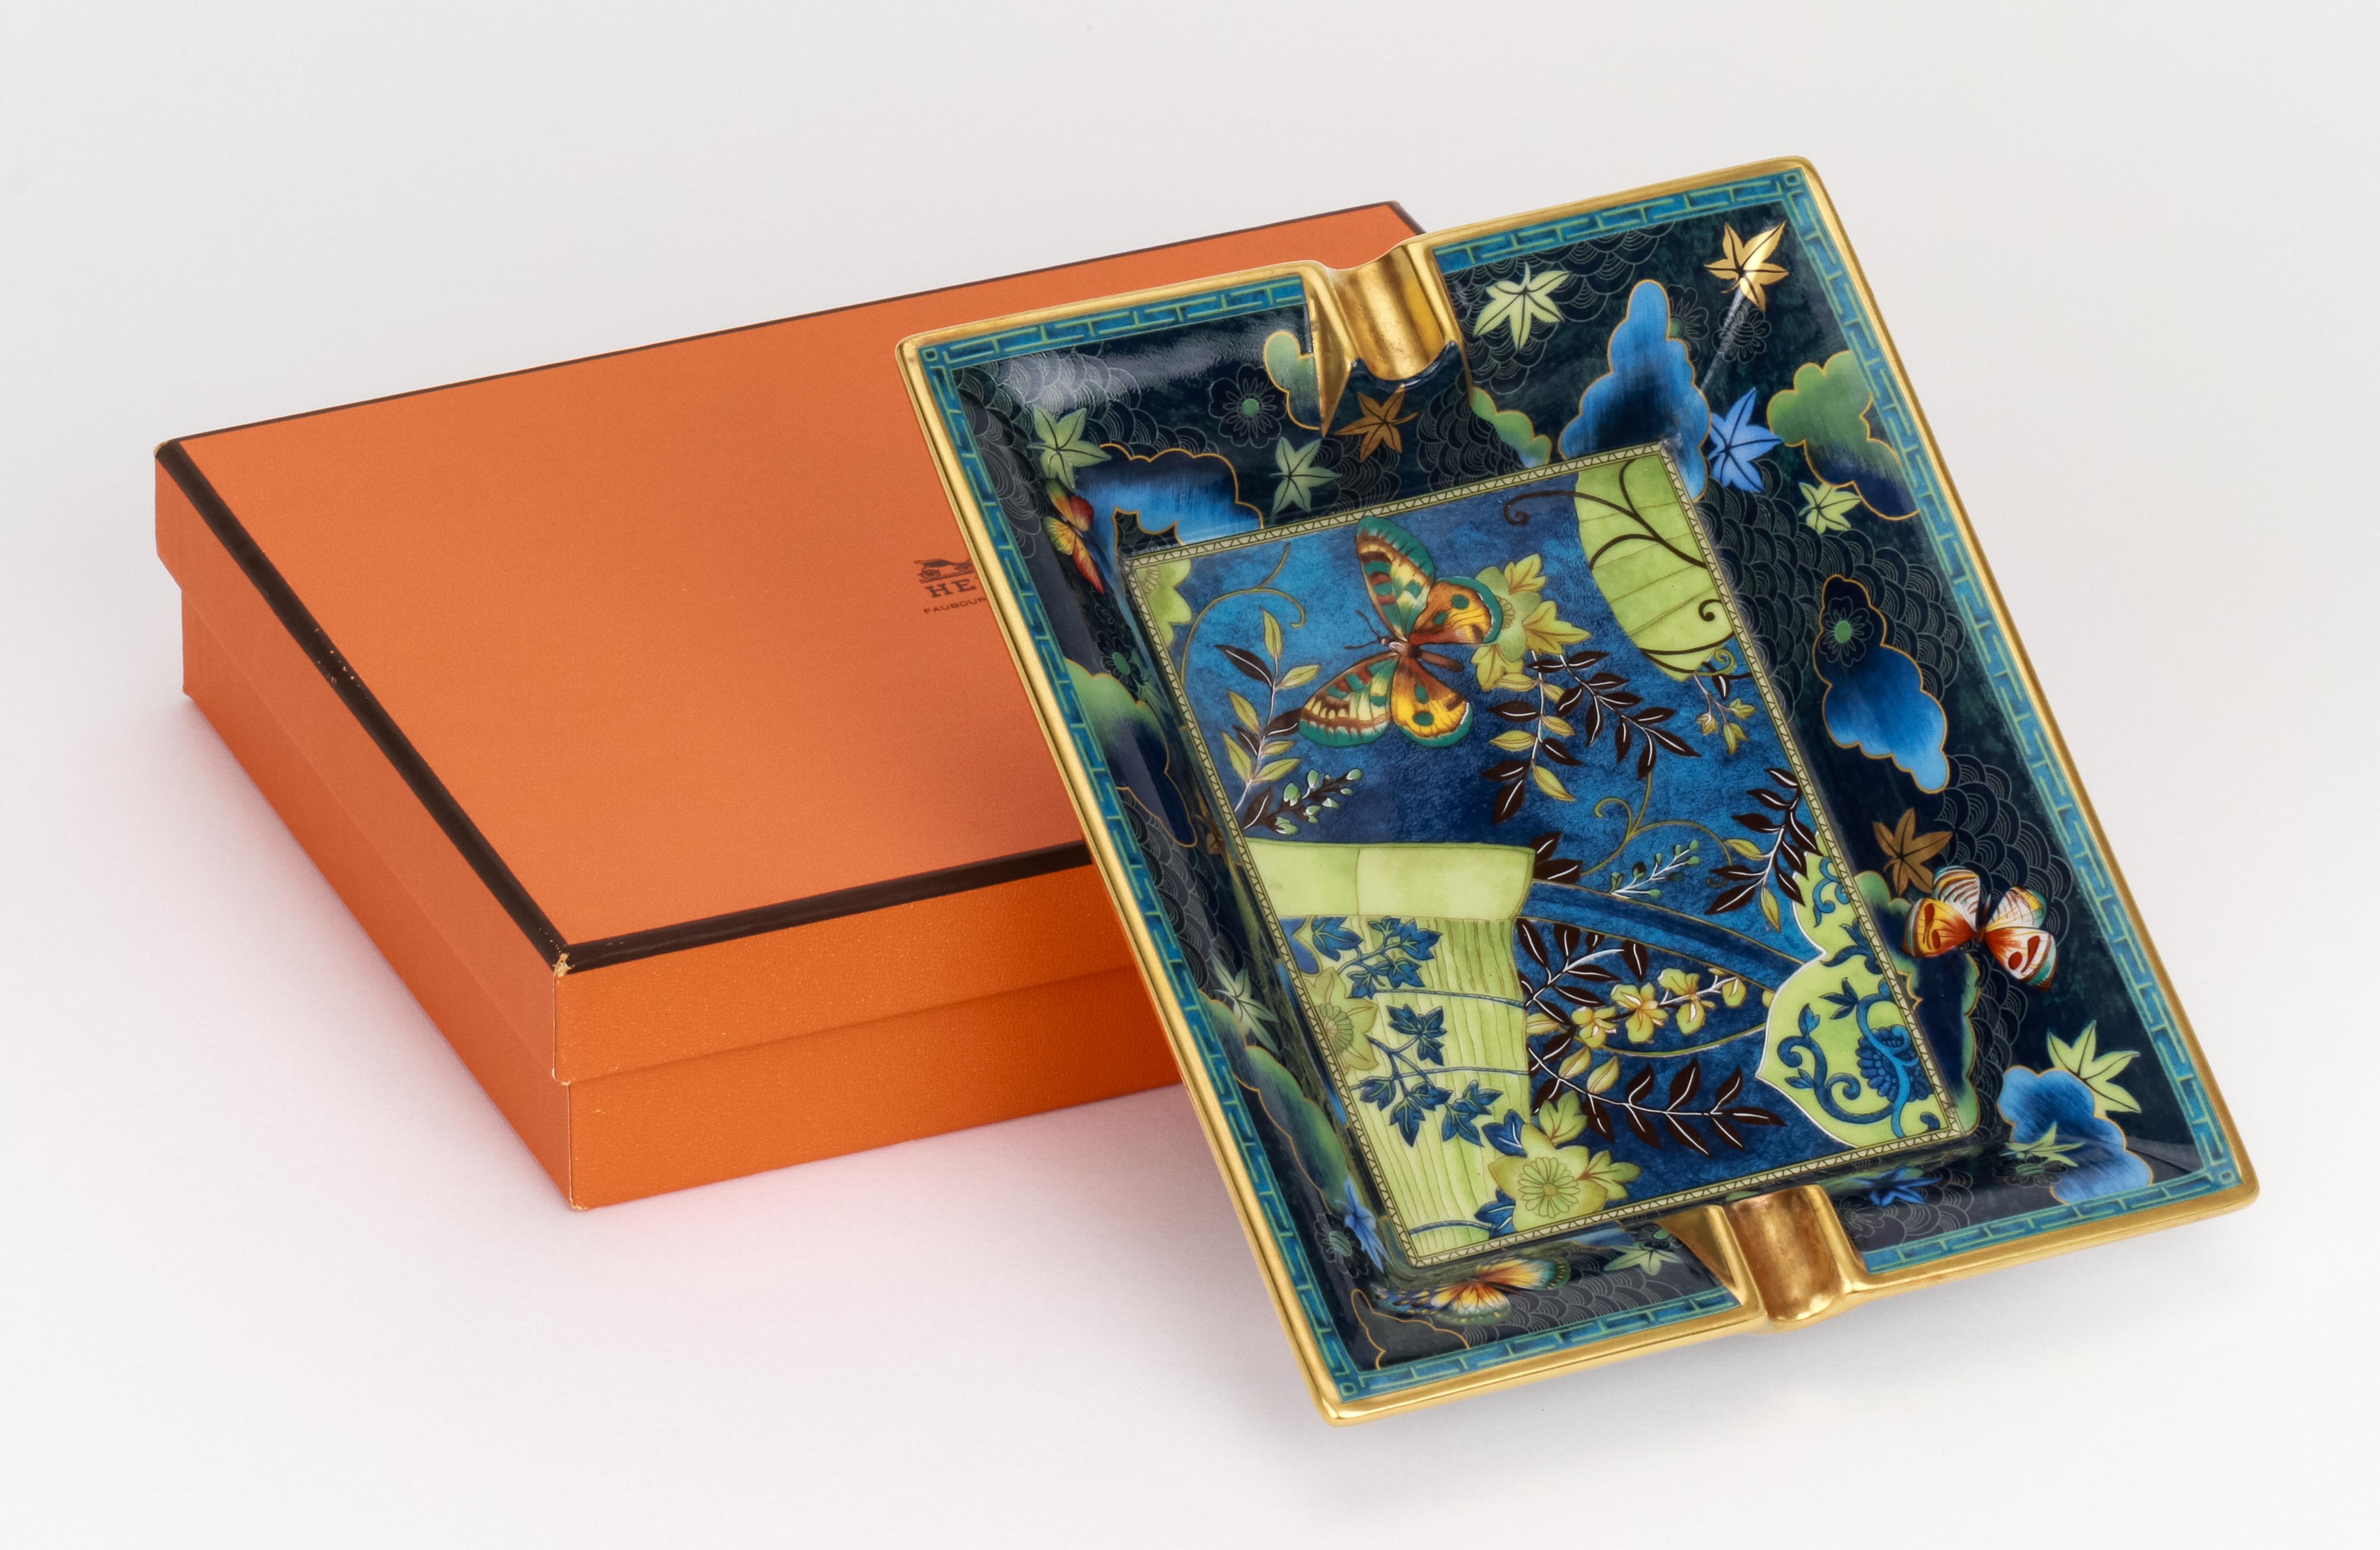 Hermès blue and green porcelain ashtray with butterfly design. Mint condition. Comes with original box.
